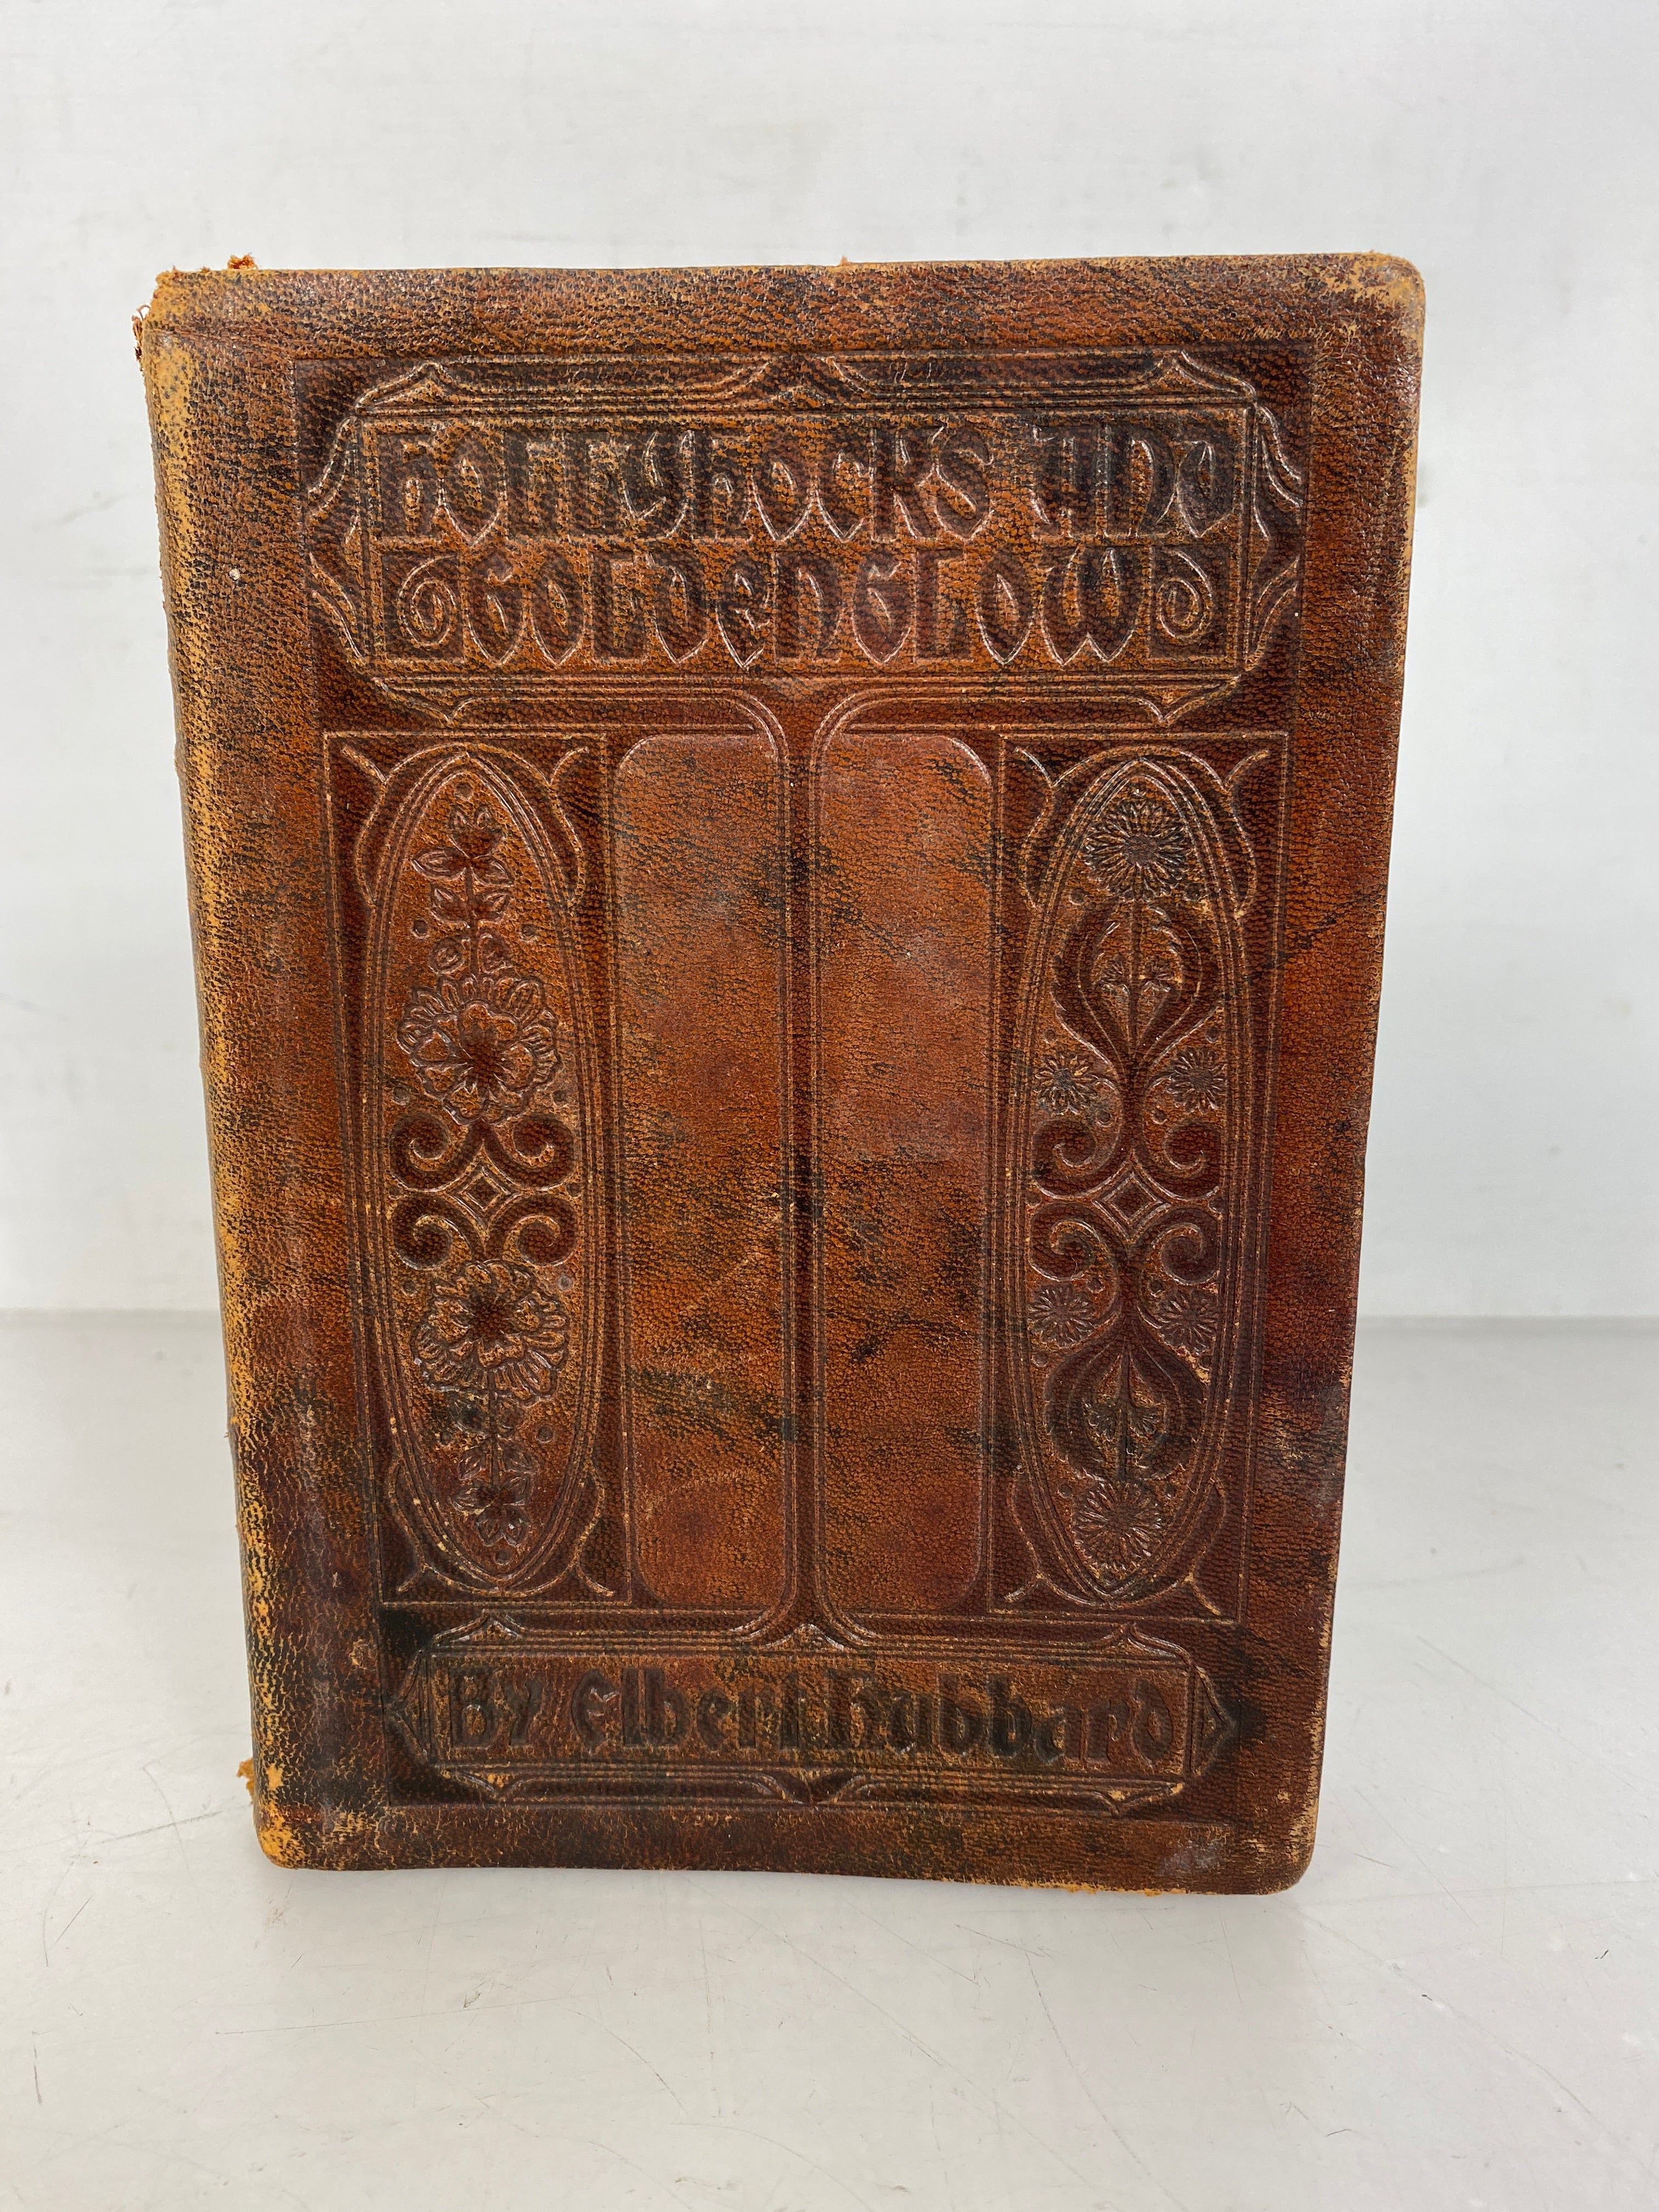 Hollyhocks and Goldenglow by Elbert Hubbard Roycroft 1912 Tooled Leather Cover Antique